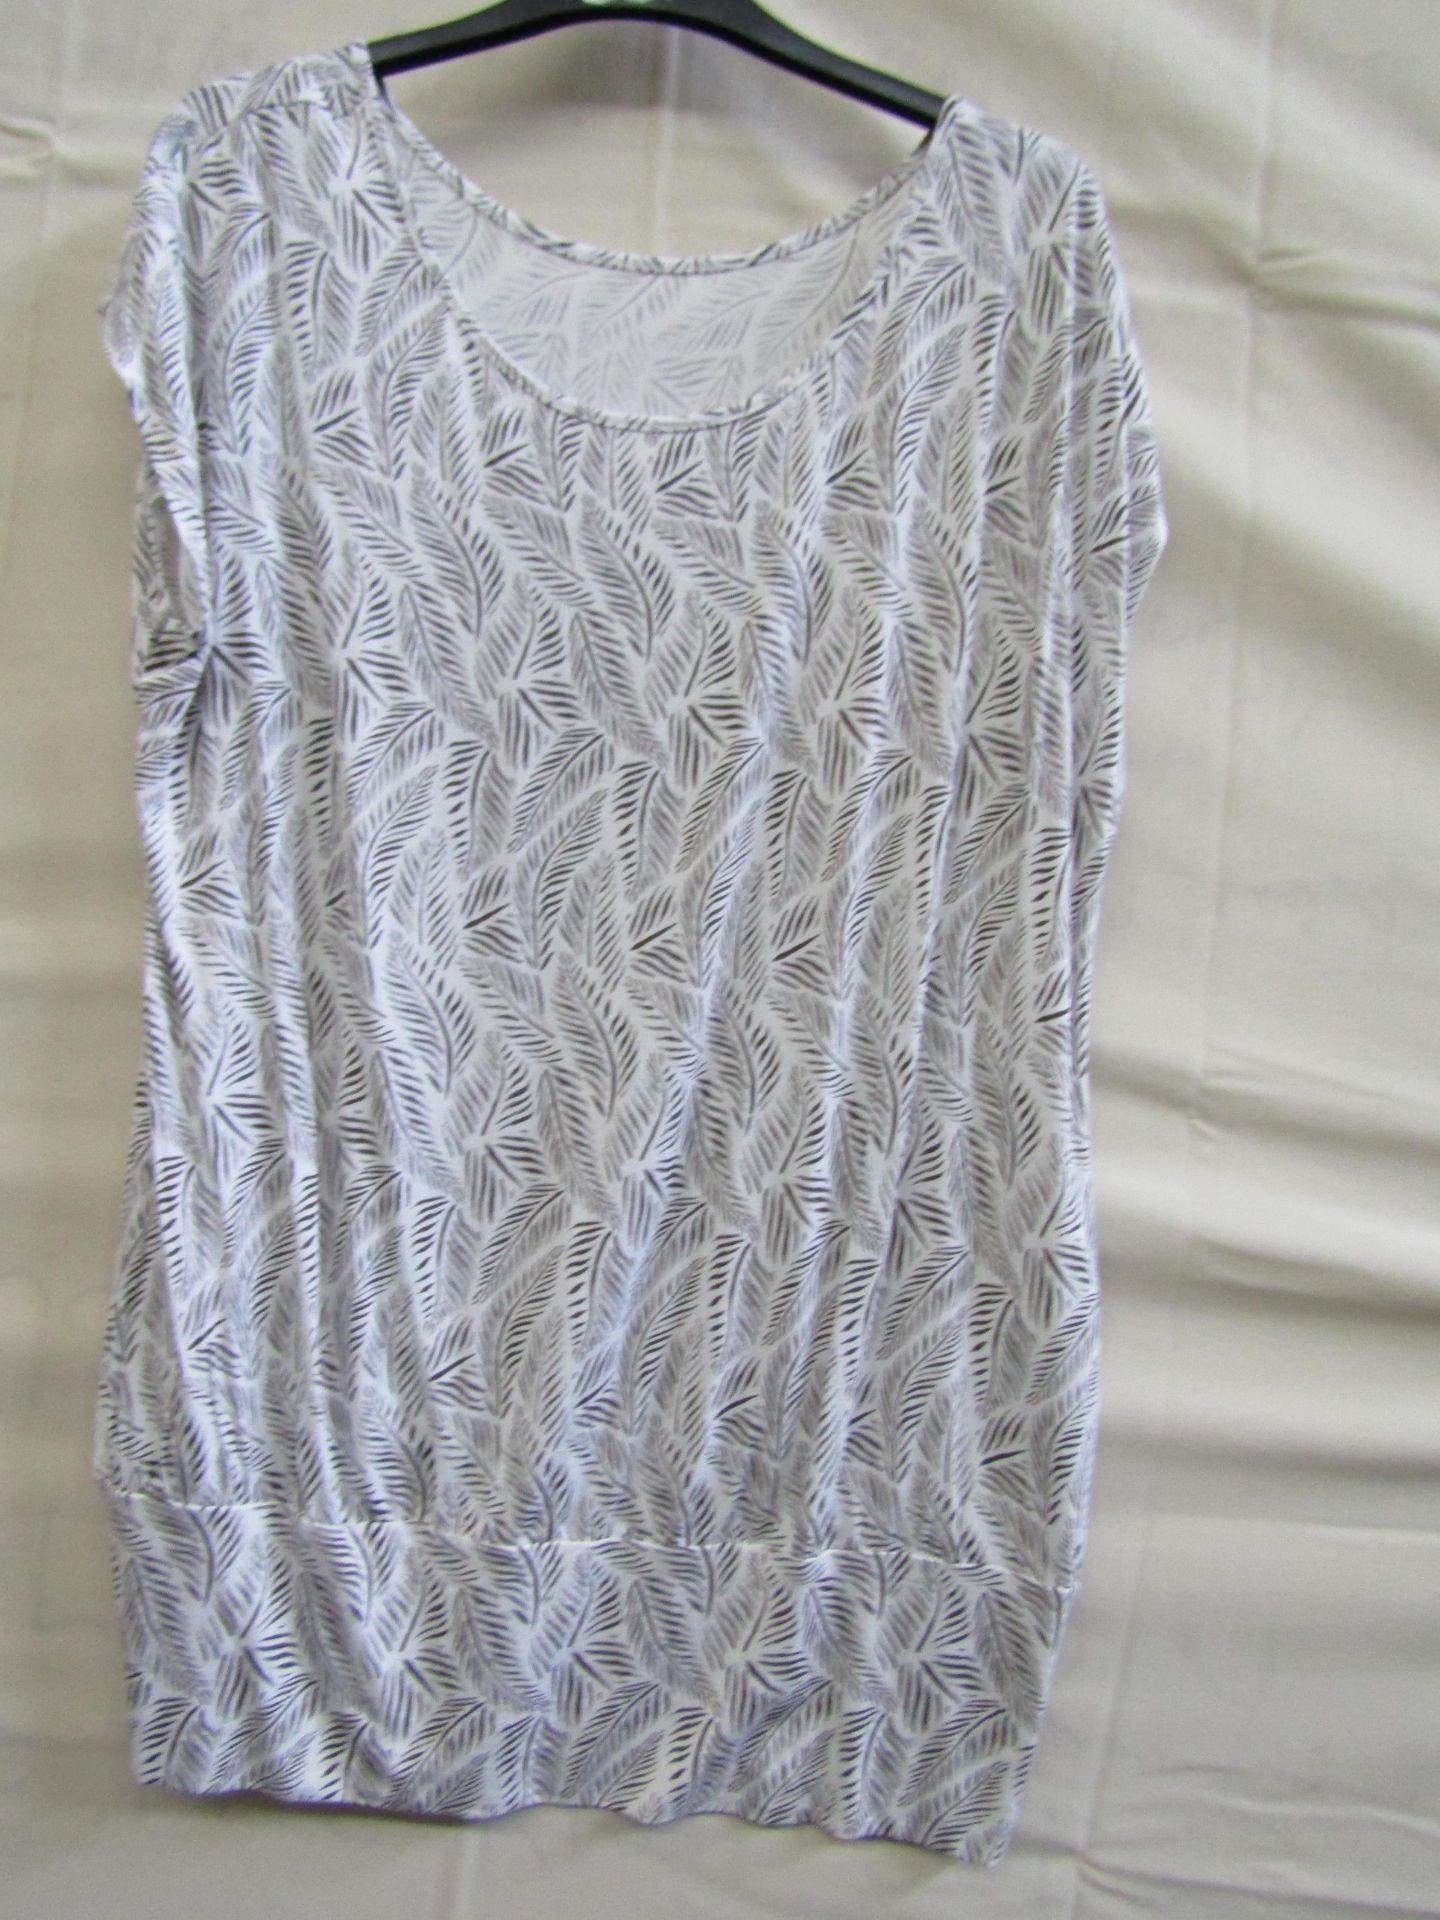 Lascana Top Size 16/18 May Have Been Worn No Tags